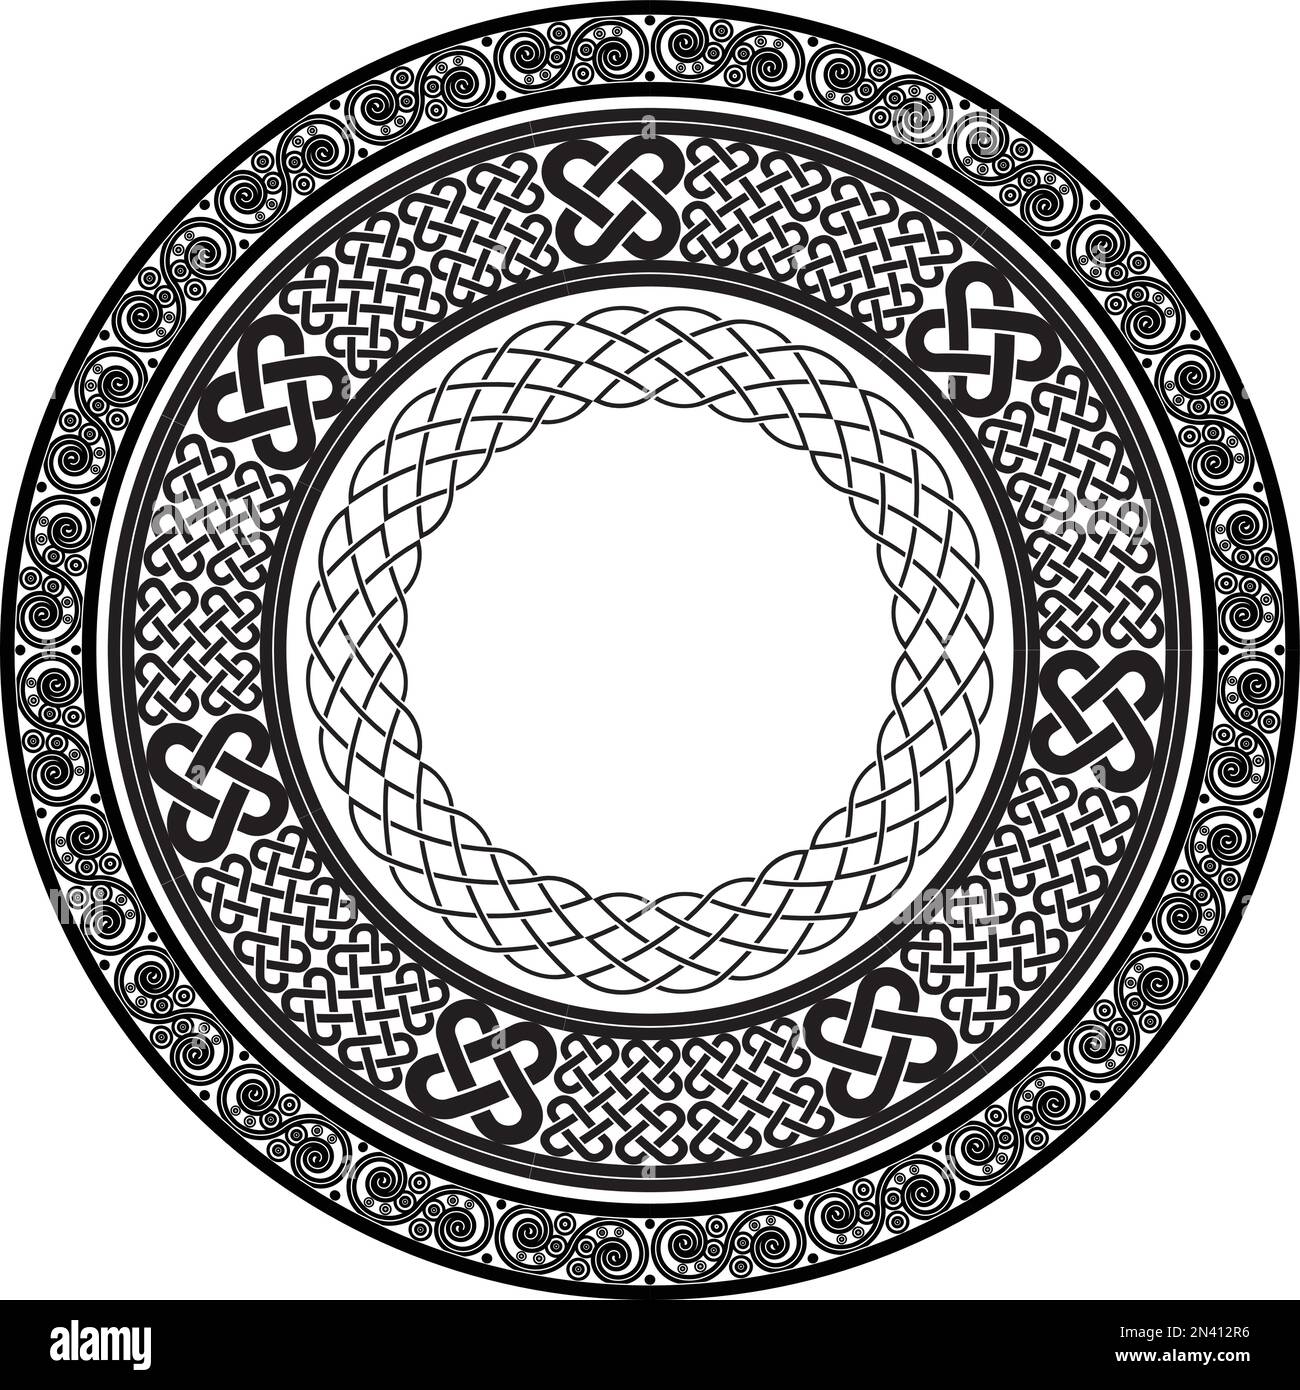 Celtic knot round frames. Set of 3 rings of celtic braids isolated on white background. Viking, medieval style vector illustration. Element for graphi Stock Vector